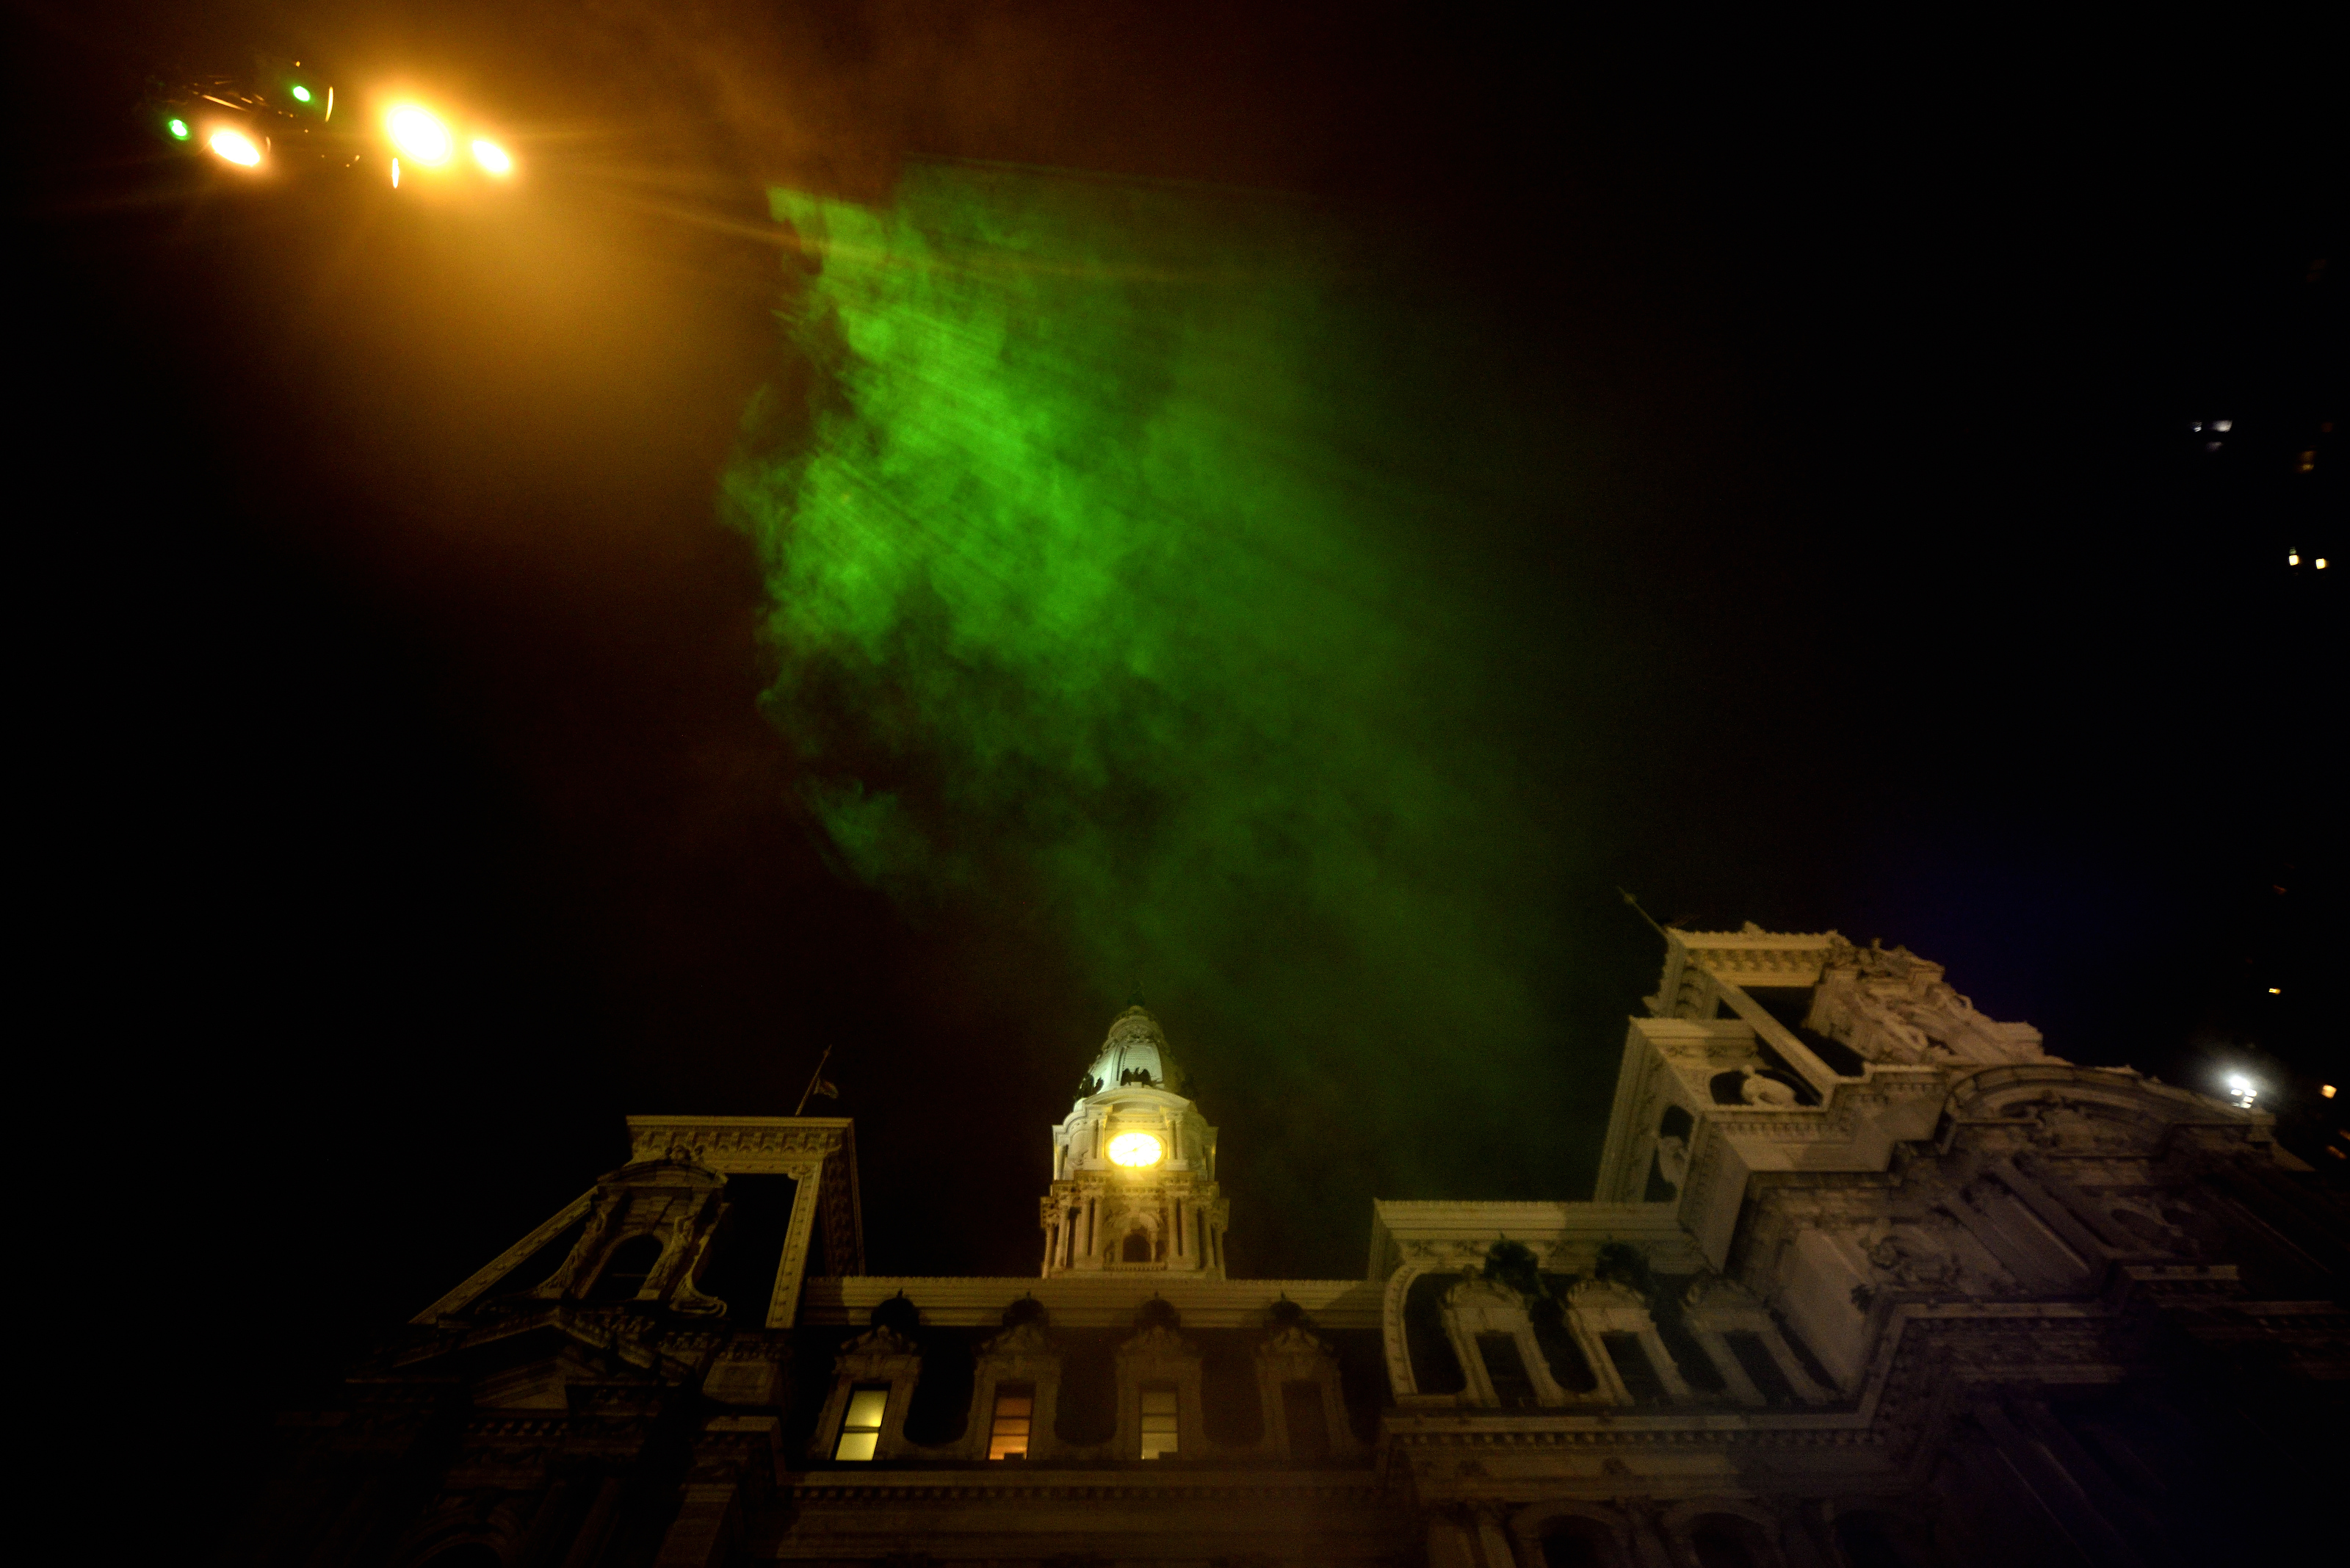 Mist catches green rays of light as it billows up towards the sky during the public unveiling of the first section of the site-specific art installation titled Pulse at the Dilworth Park’s fountain, on Wednesday. (Bastiaan Slabbers for WHYY)